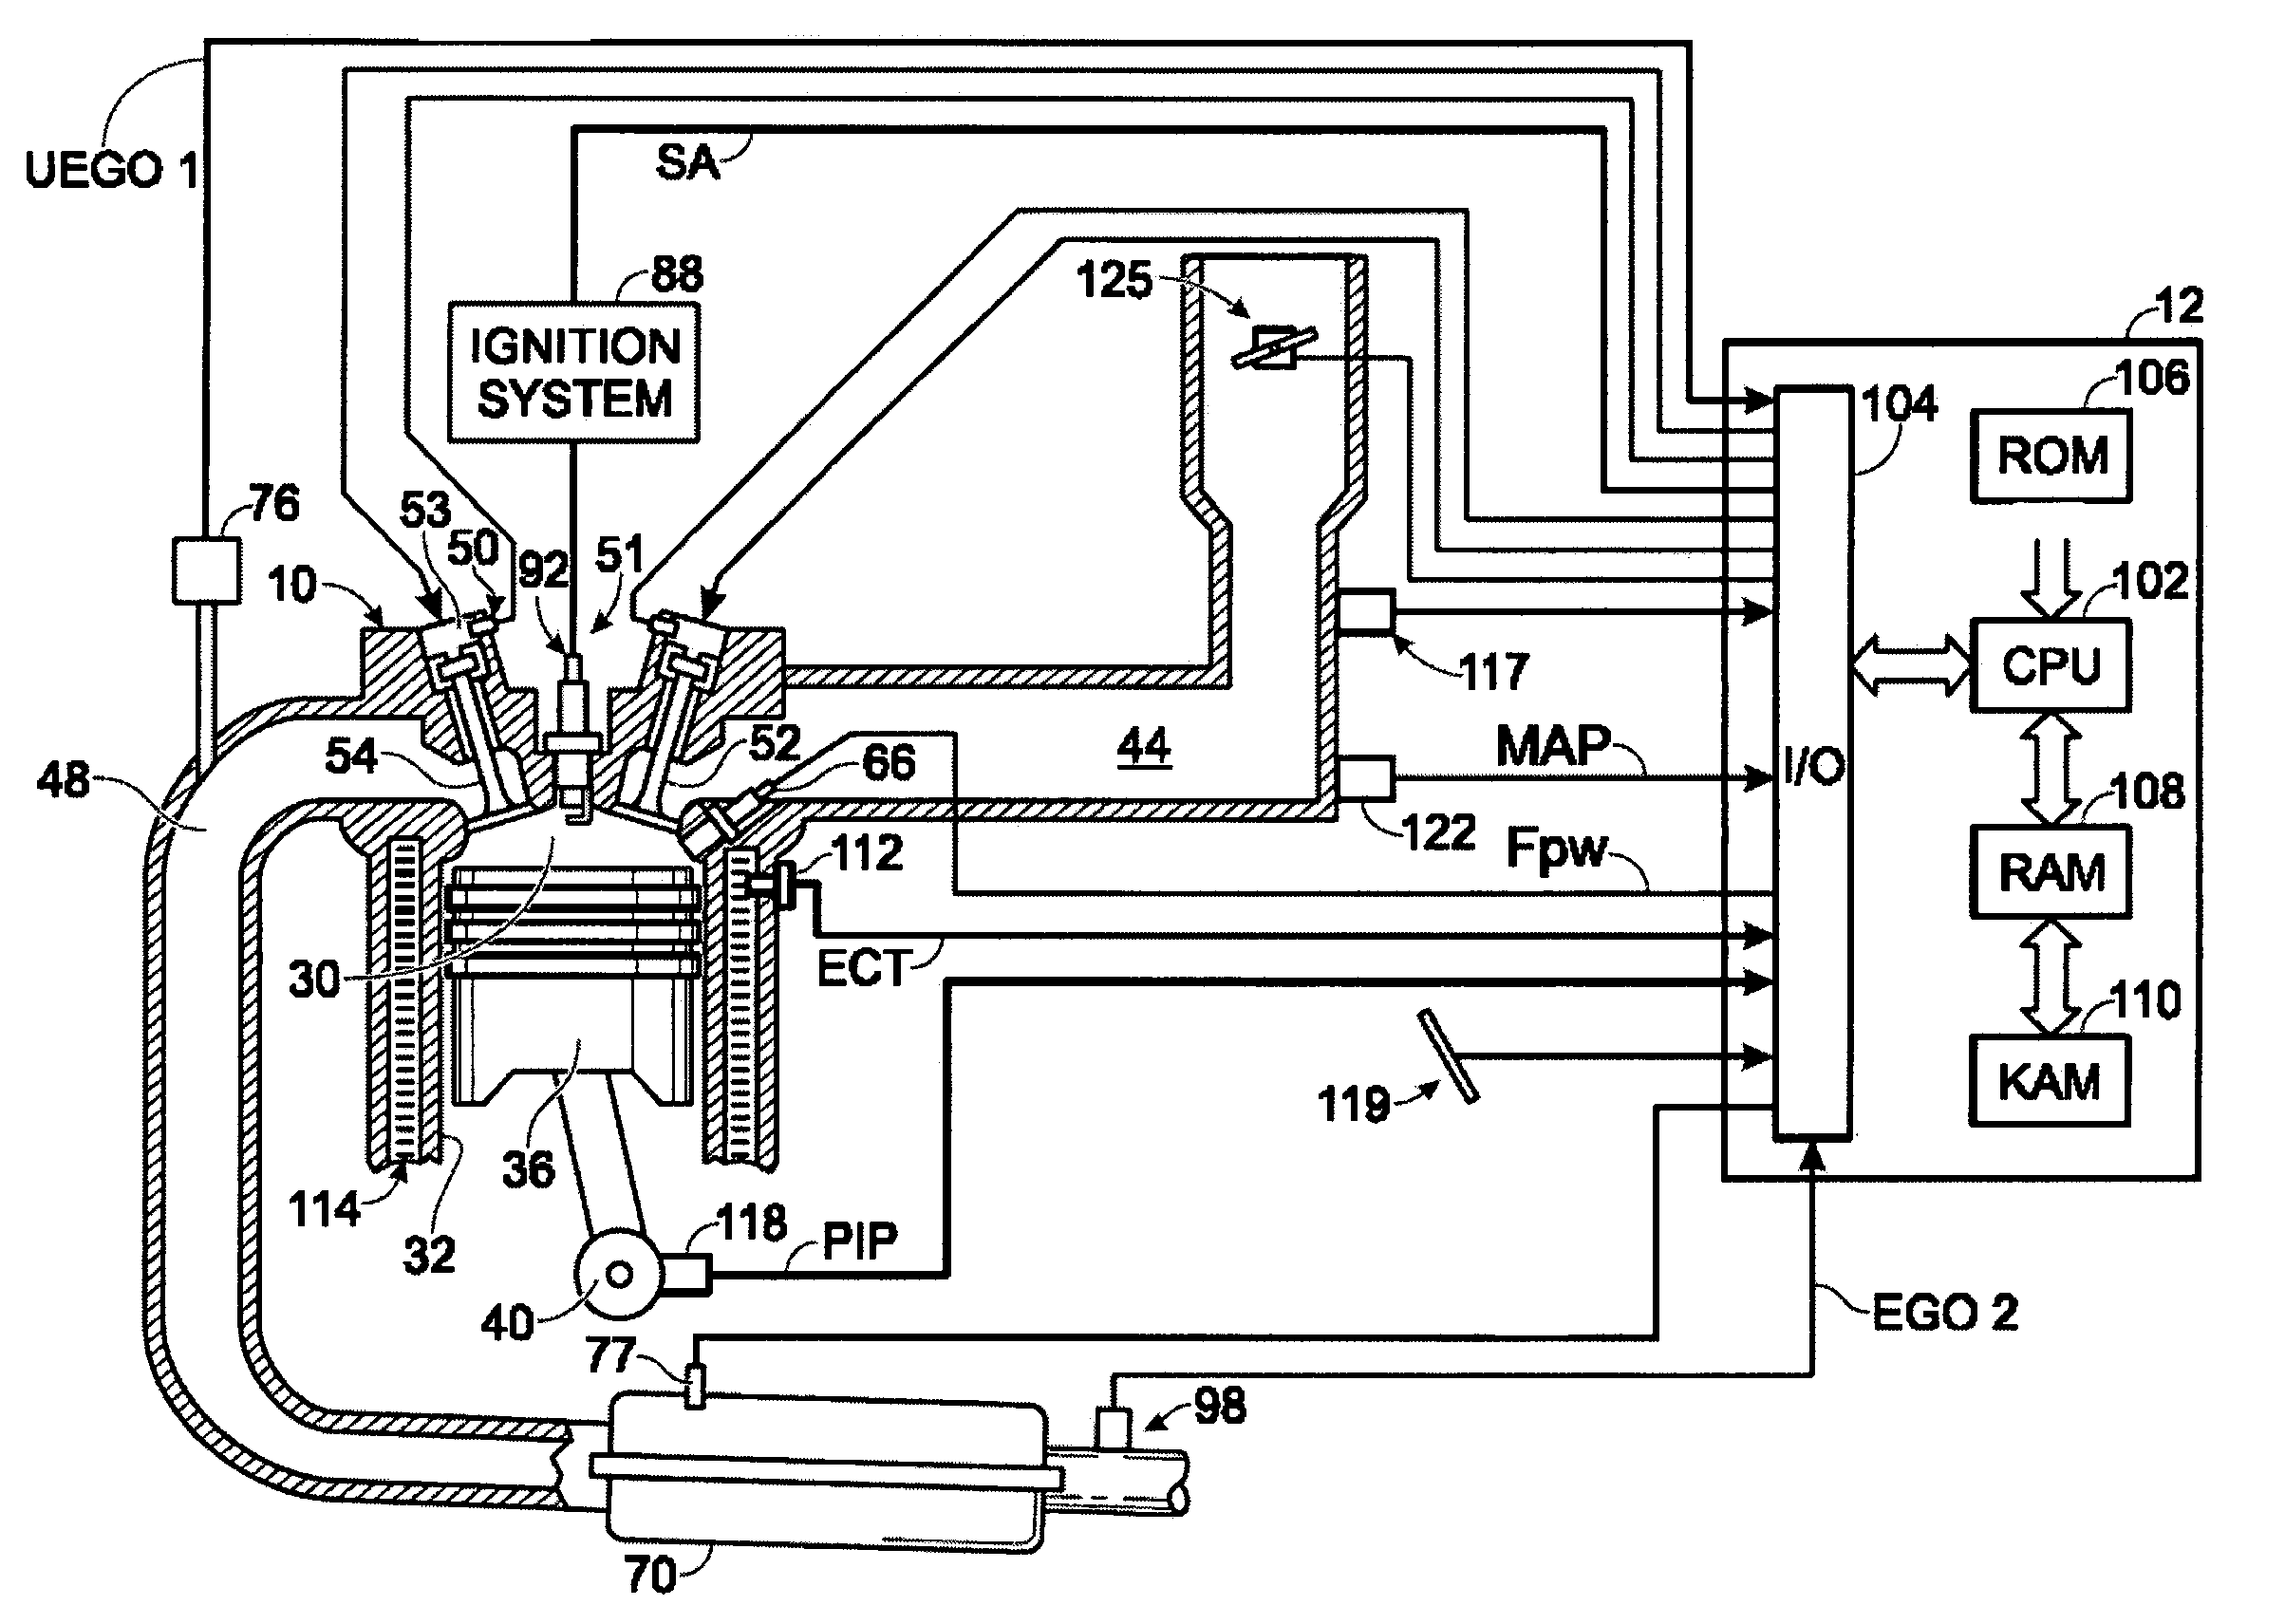 Exhaust reductant generation in a direct injection engine with cylinder deactivation